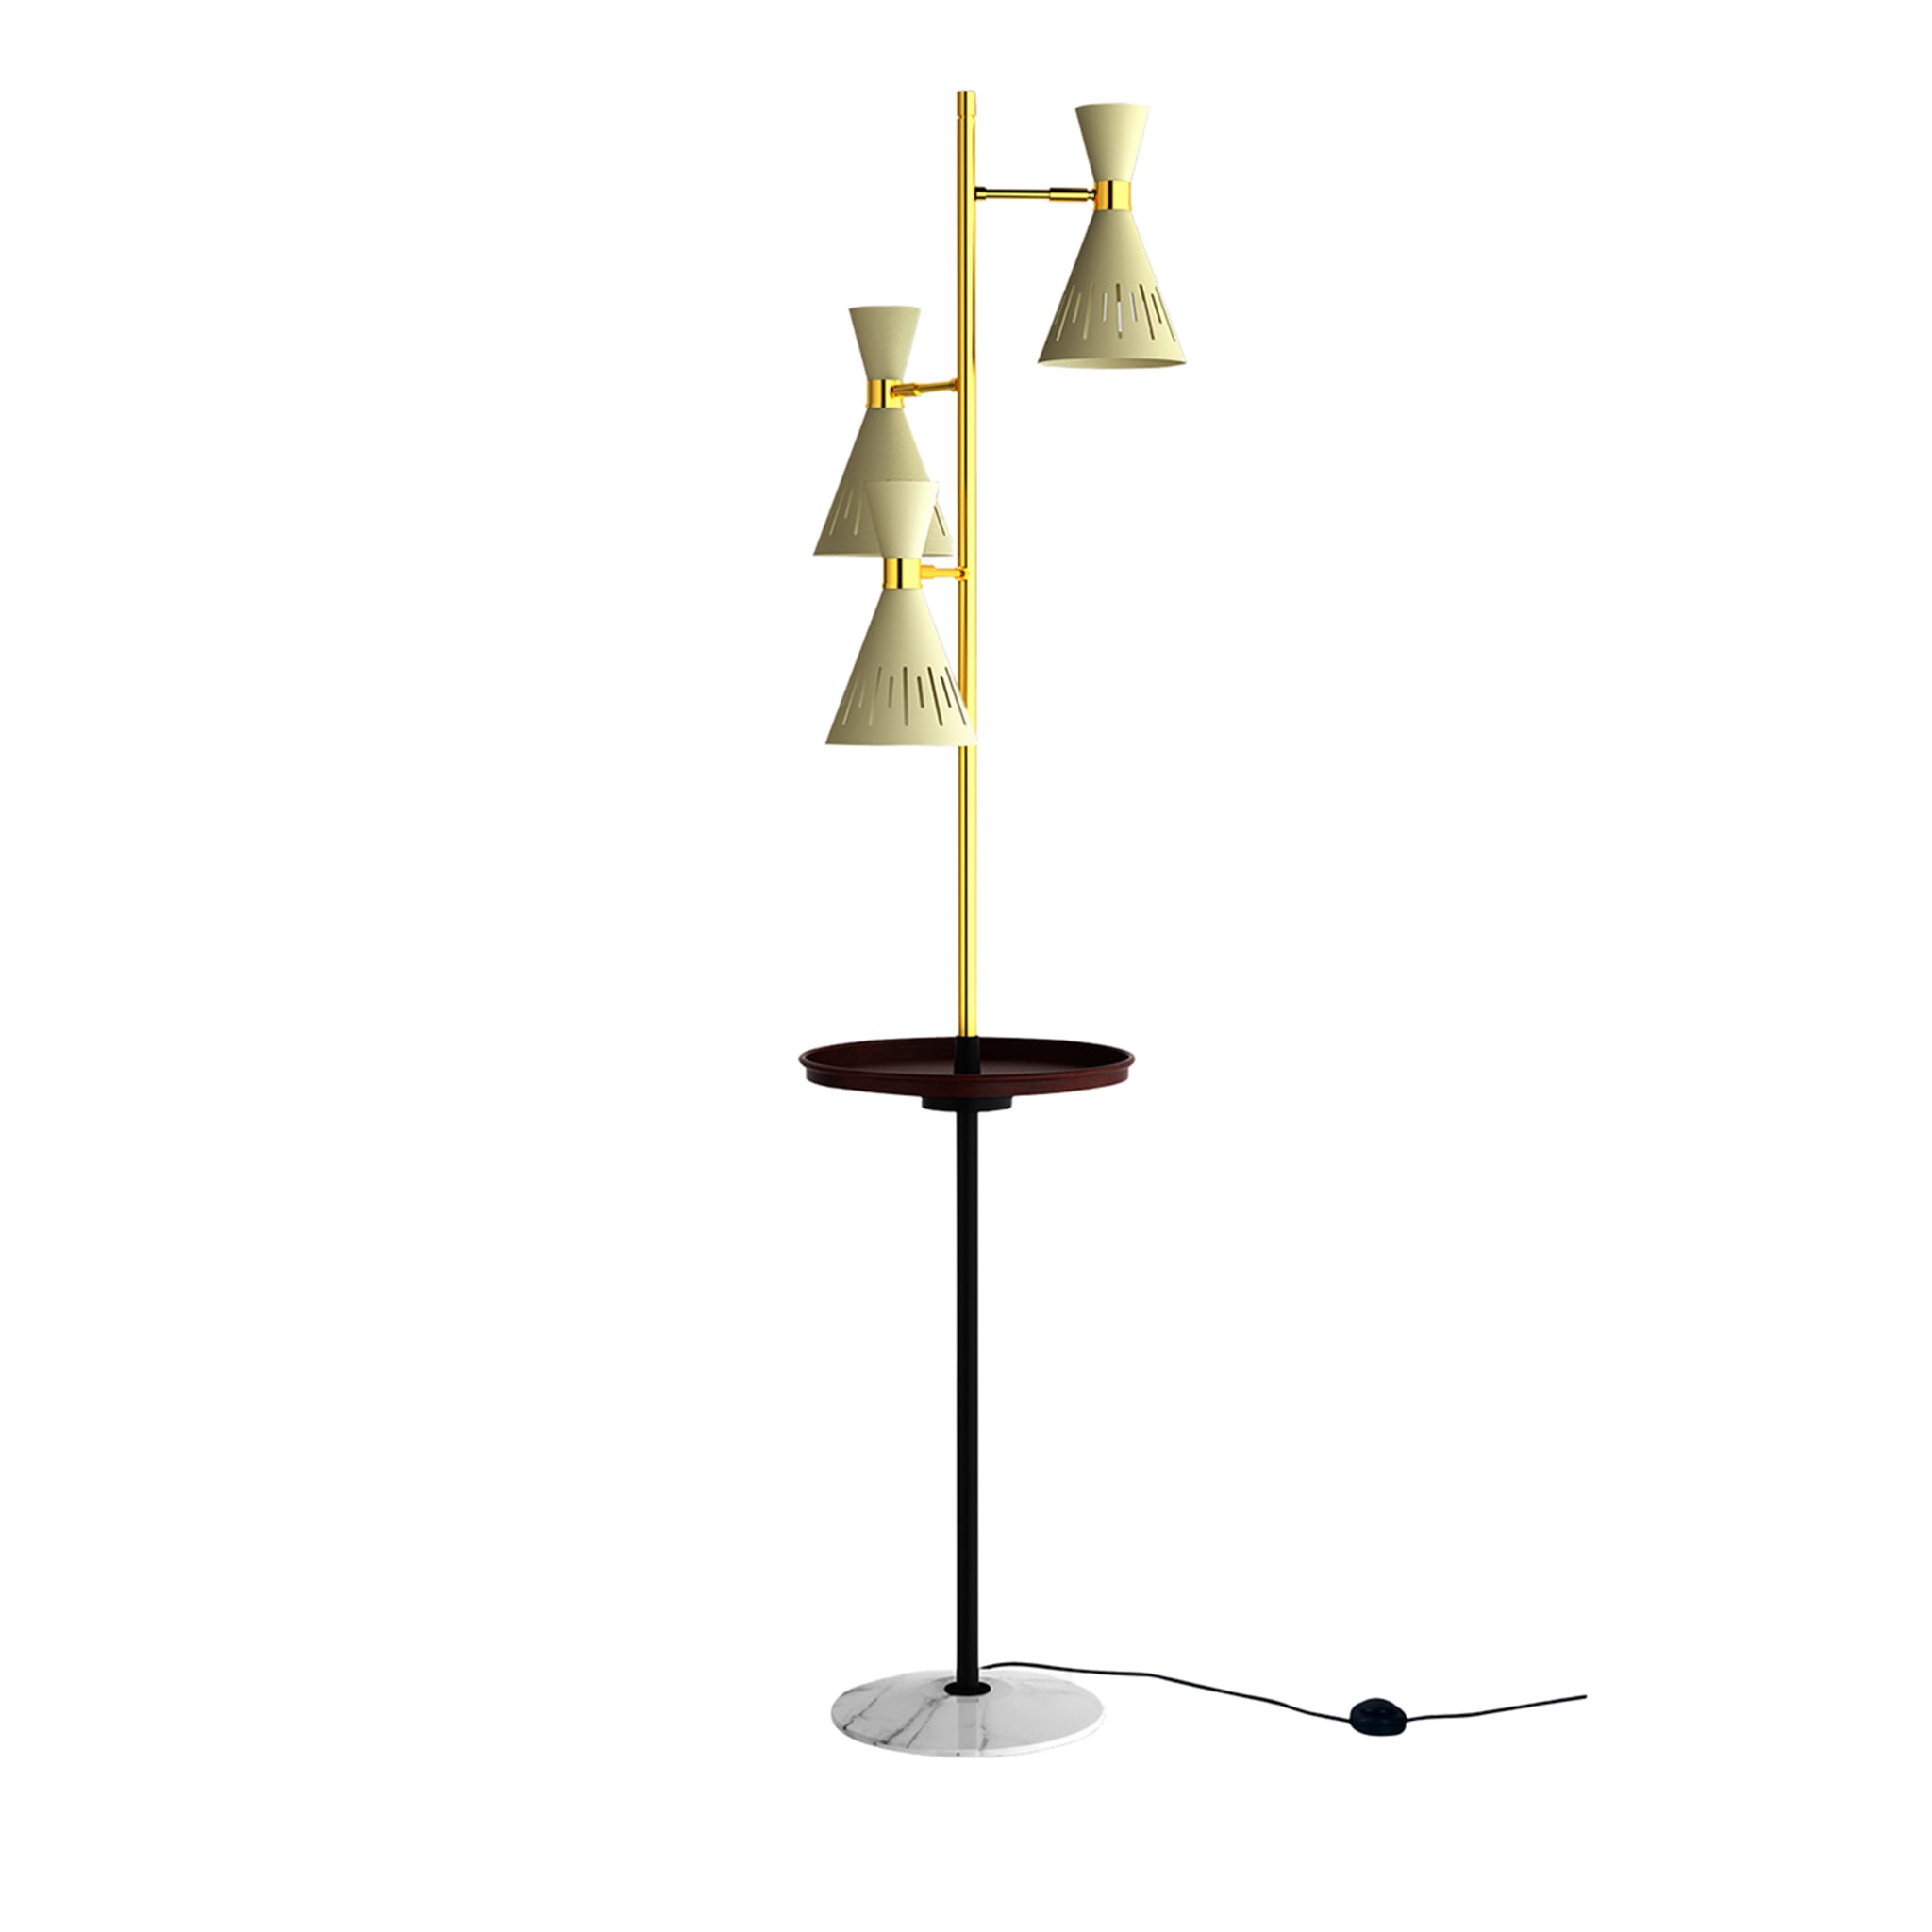 Pop Ivory and Polished Brass Floor Lamp - Alternative view 1